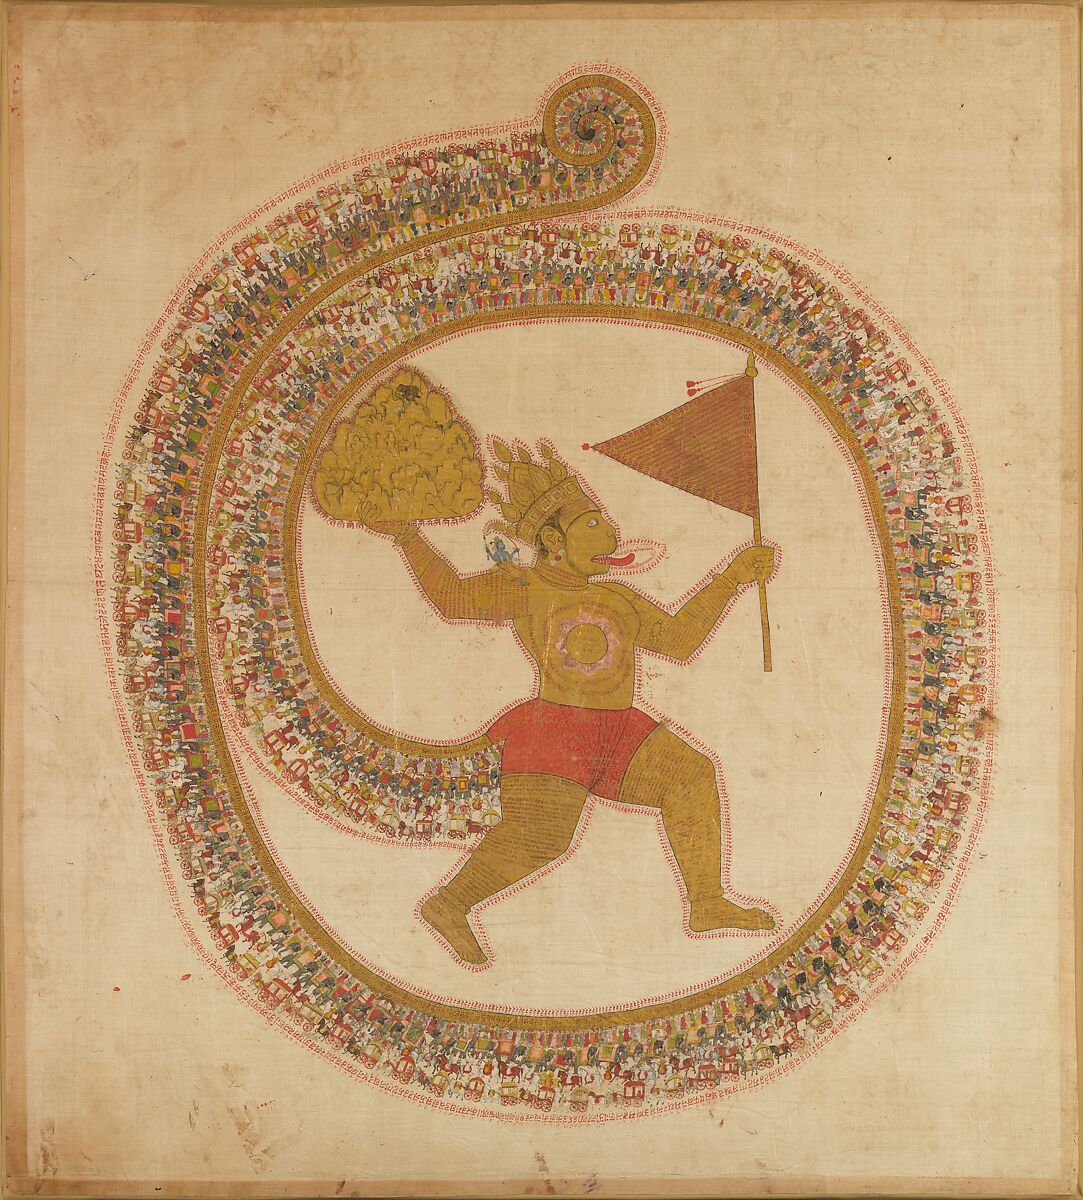 Hanuman Bearing the Mountaintop with Medicinal Herbs, Ink and opaque watercolor on cloth, India (Rajasthan) 